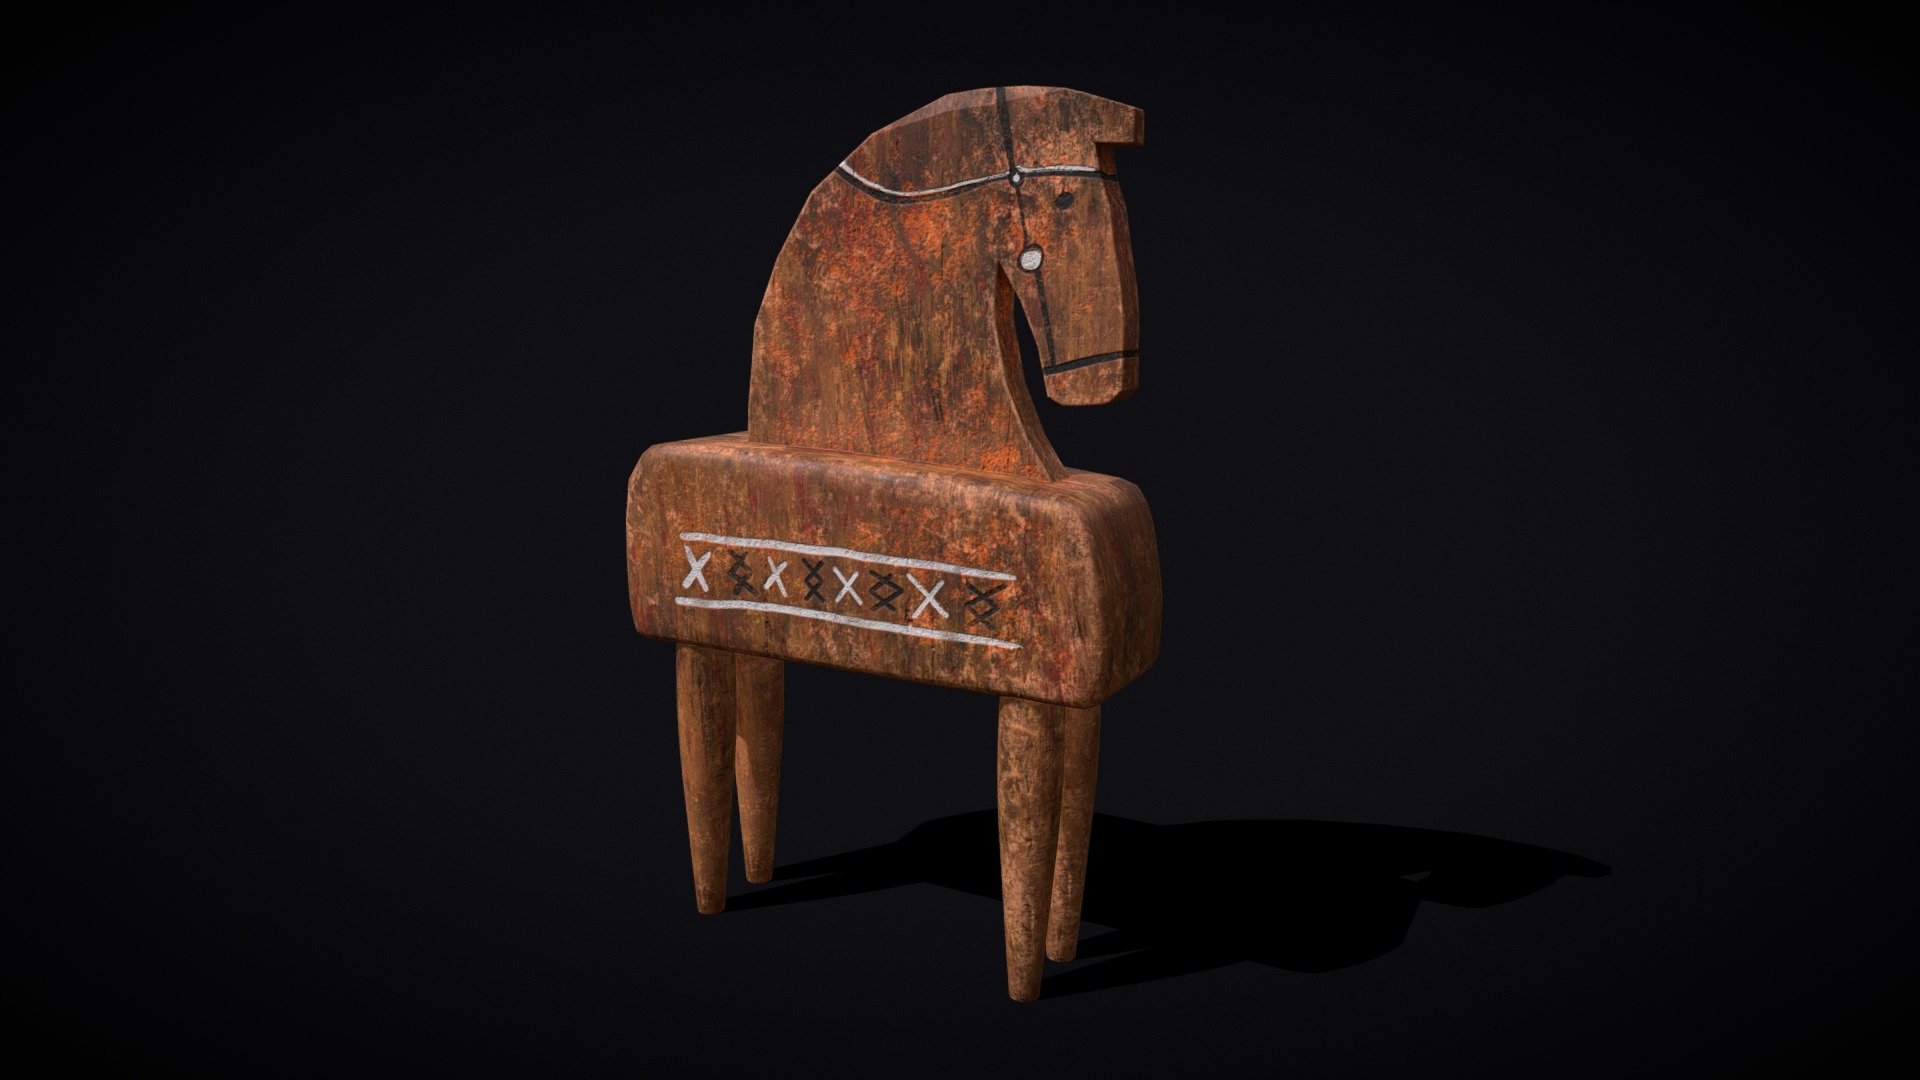 Rustic Hand Painted Toy Horse VR / AR / low-poly 3d model
VR / AR / Low-poly
PBR approved
Geometry Polygon mesh
Polygons 1,886
Vertices 1,874
Textures 4K - Rustic Hand Painted Toy Horse - Buy Royalty Free 3D model by GetDeadEntertainment 3d model